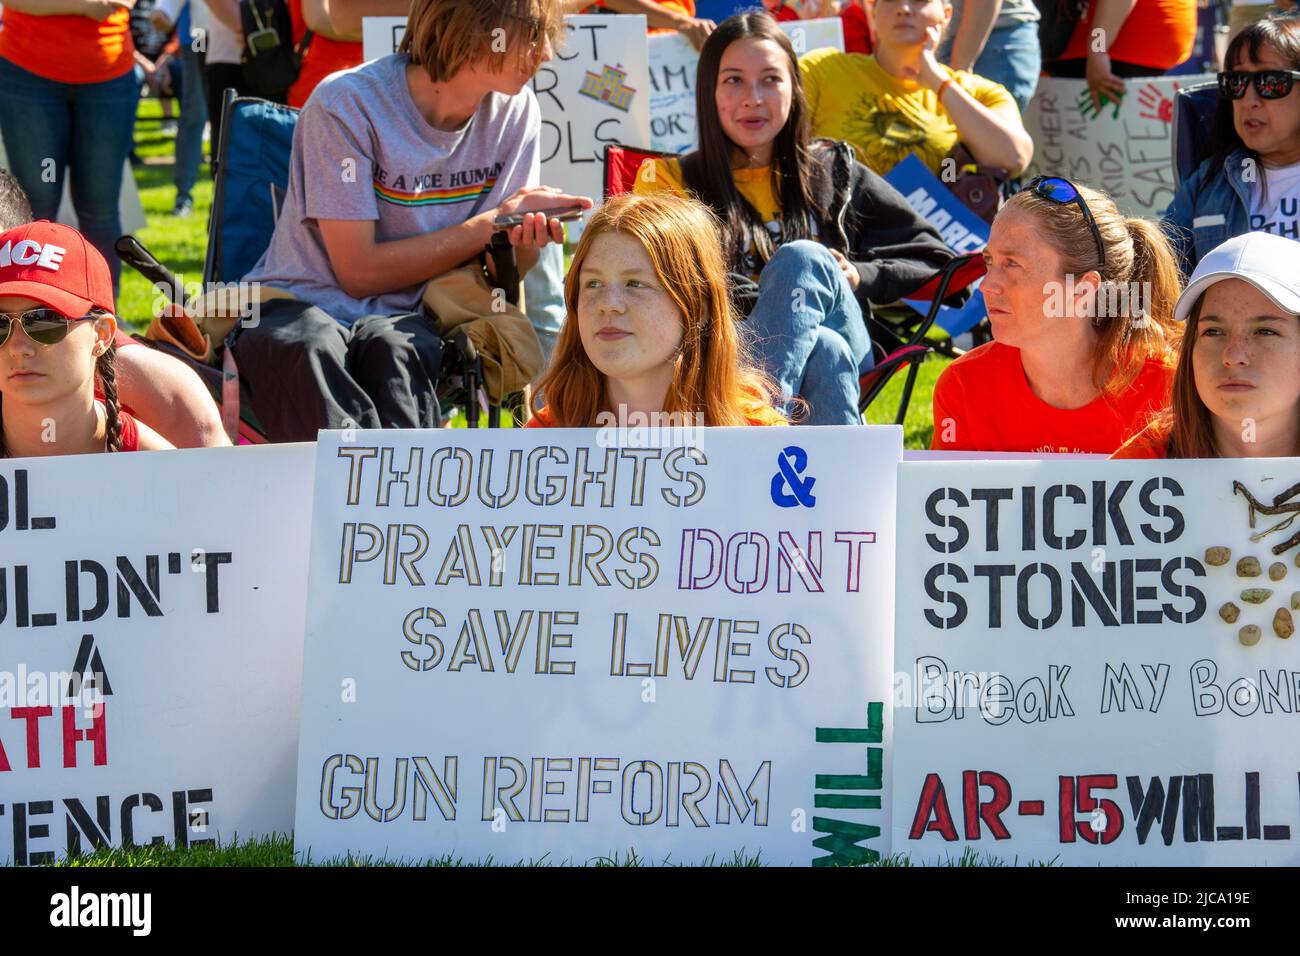 Oxford, Michigan, USA. 11th June, 2022. Hundreds rallied for tighter gun control laws in the town where four students were shot and killed at Oxford High School in November 2021. It was one of many rallies organized by March for Our Lives across the country protesting gun violence and mass shootings. The Oxford rally was organized by the student group No Future Without Today. Credit: Jim West/Alamy Live News Stock Photo